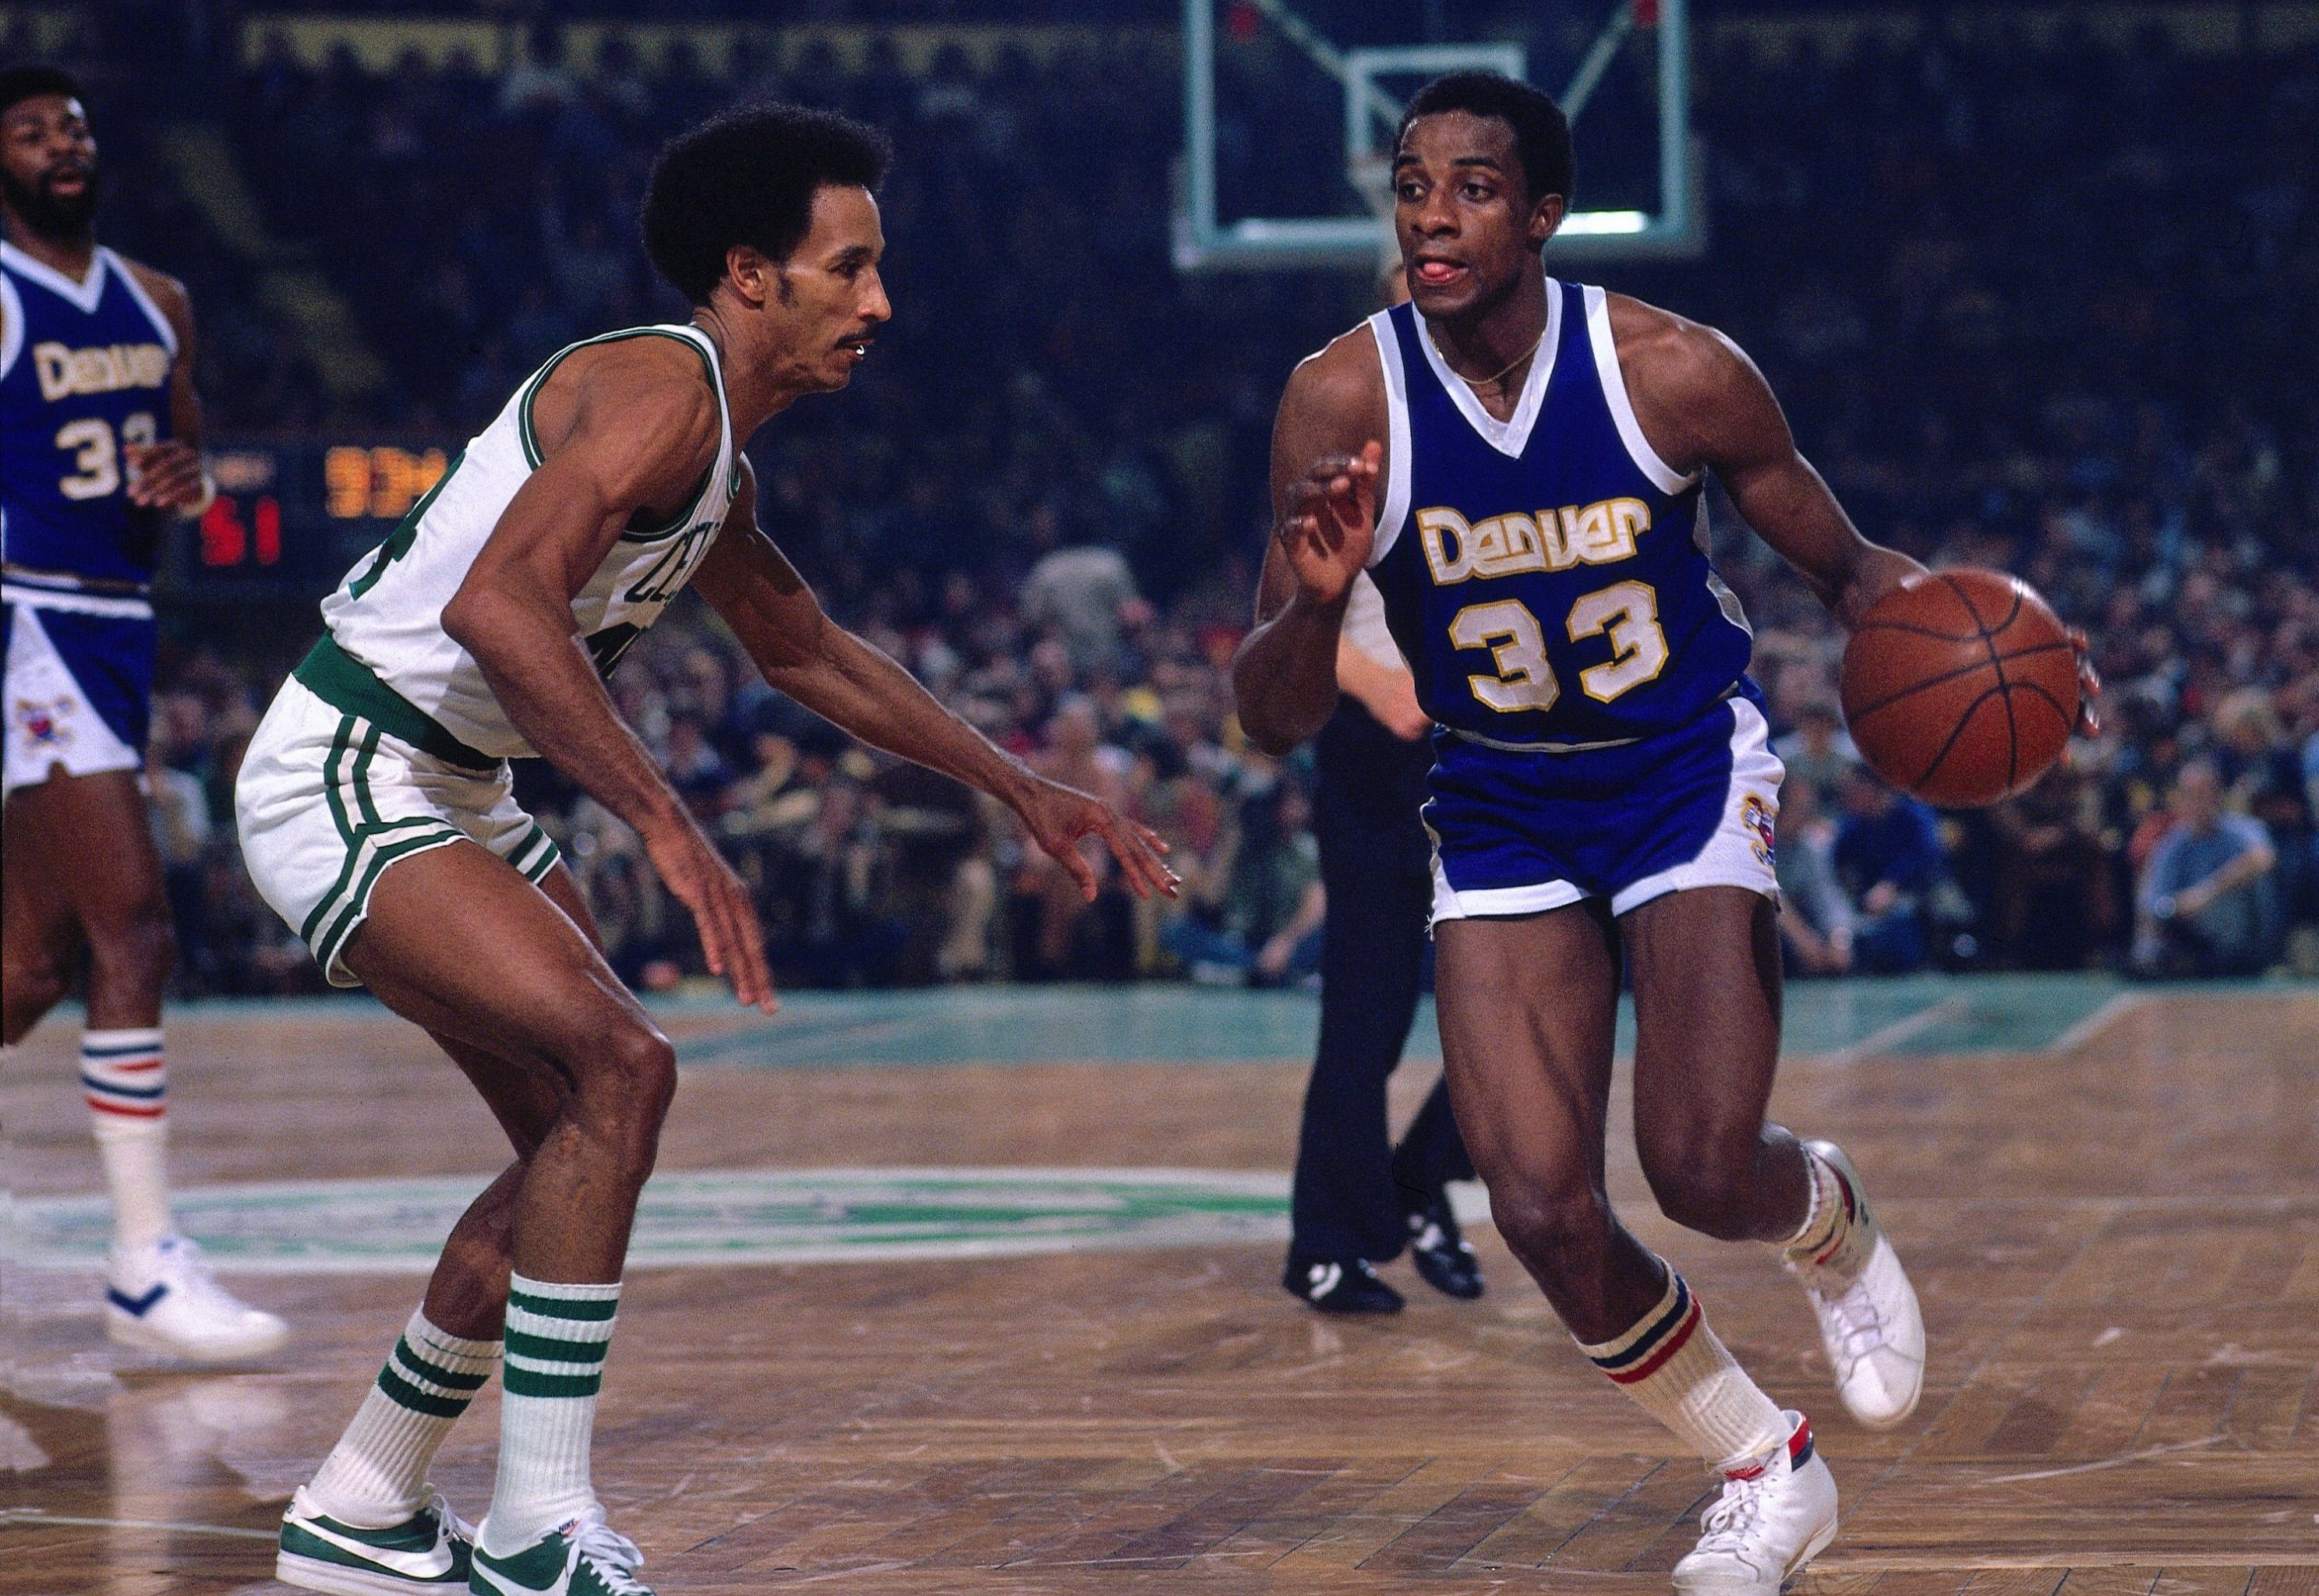 NBA 75: At No. 67, Nate 'Tiny' Archibald made history with his  unselfishness and vision - The Athletic